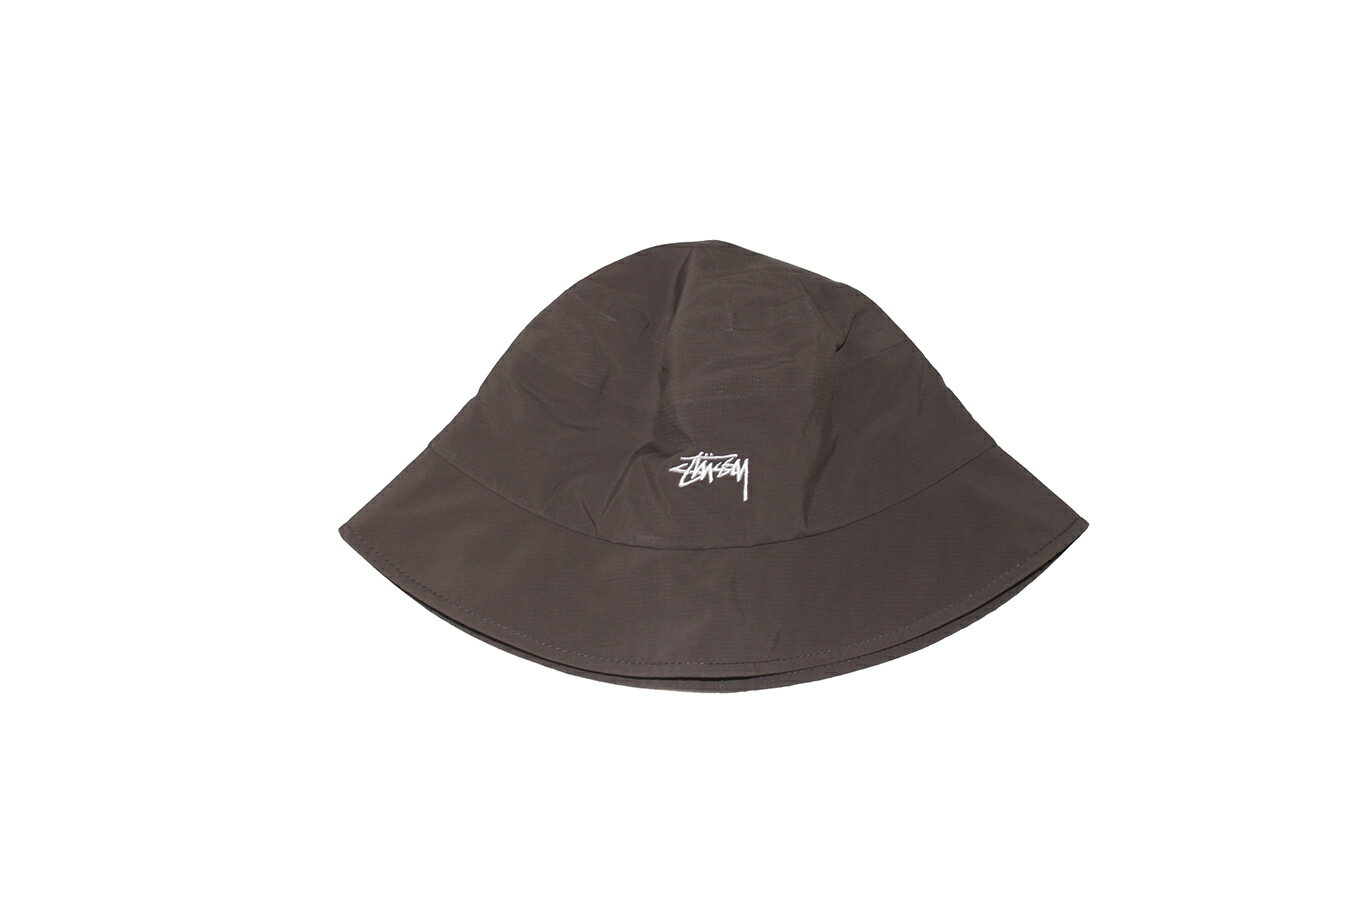 STUSSY OUTDOOR PANEL BUCKET HAT BROWN SIZE L/XL